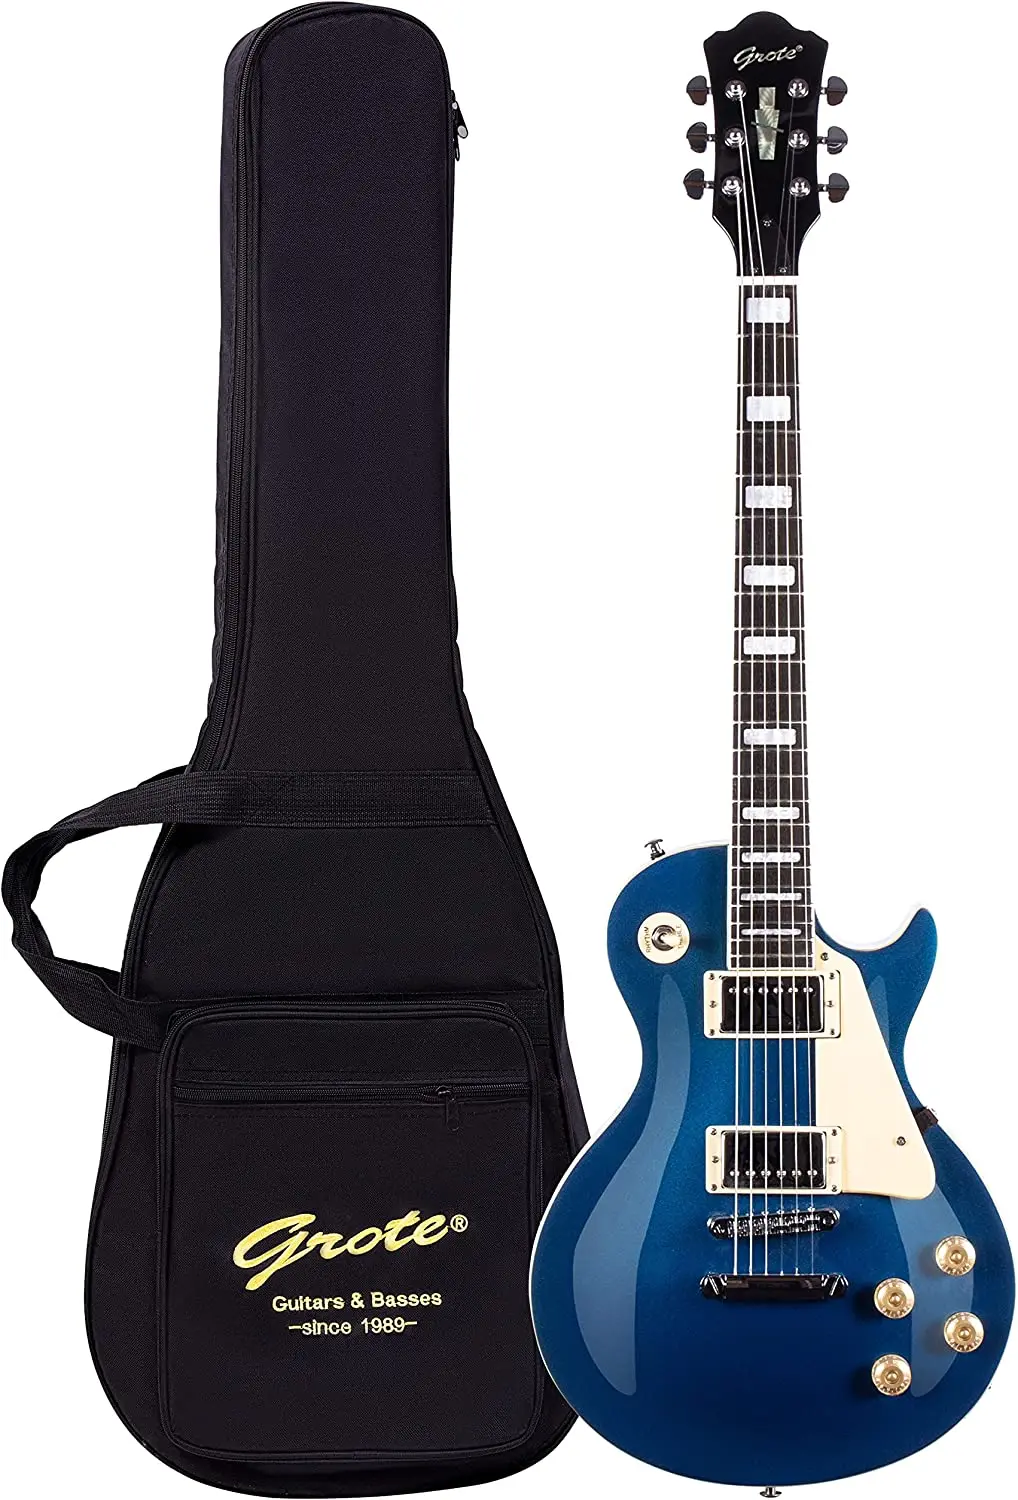 Classic Grote Chibson Solid Body Electric Guitar Stainless Steel Frets Tune-O-Matic Bridge with Gigbag Picks